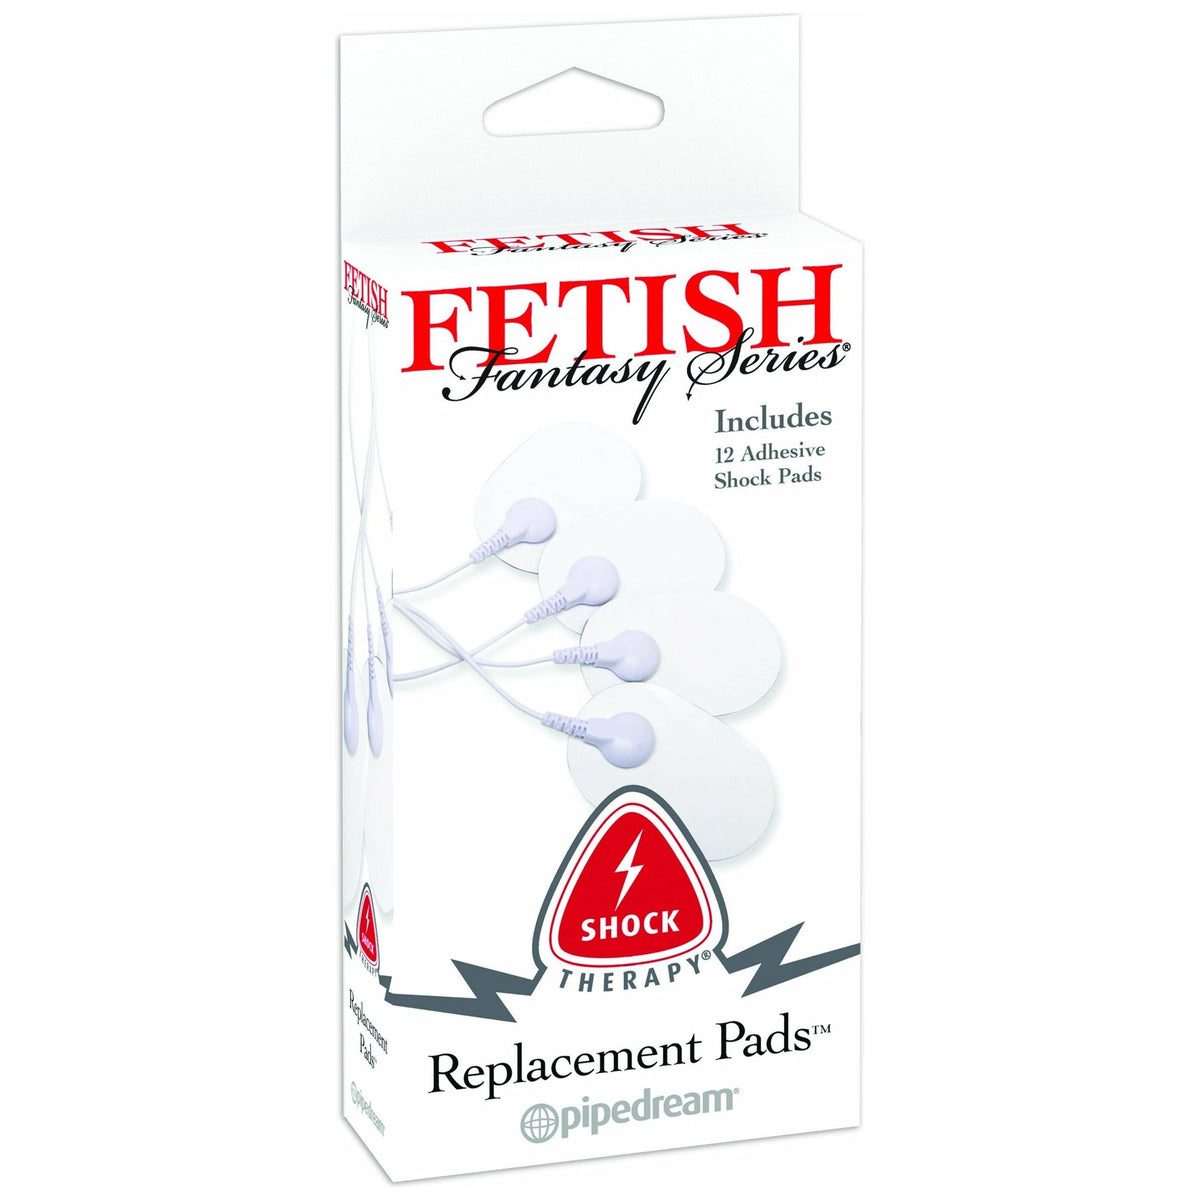 Pipedream Products Fetish Fantasy Series Shock Therapy Replacement Pads